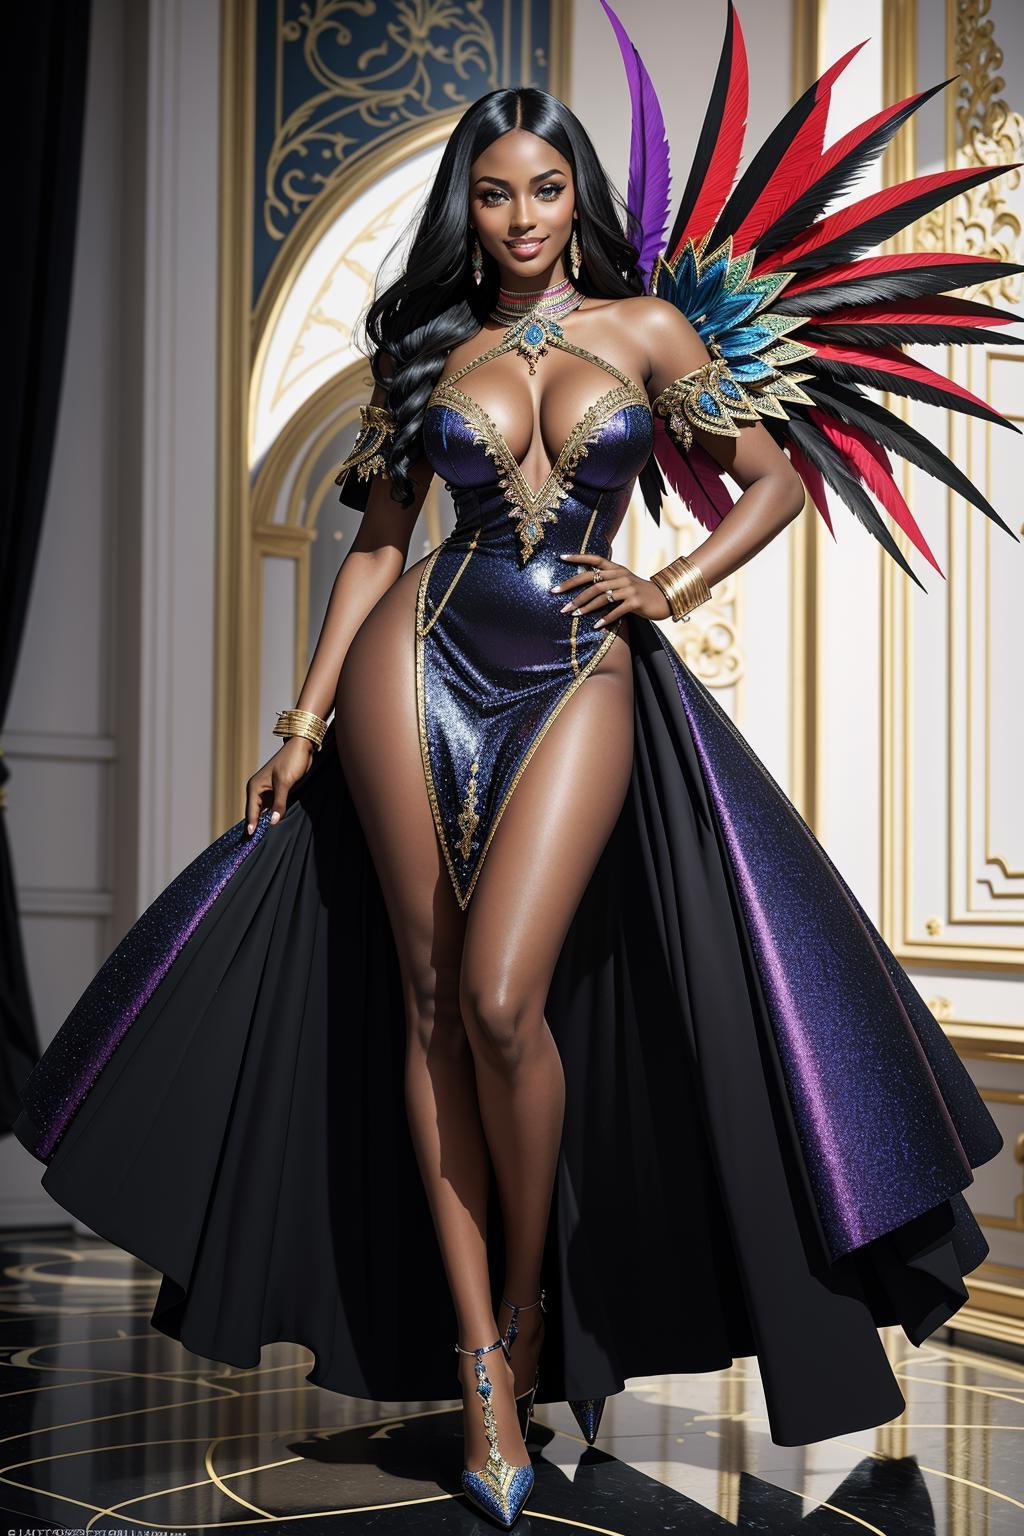 ((Masterpiece, best quality,edgQuality)), standing,posing for a picture,smiling,excited, Haute_Couture,edgCarnival, shiny dress, standing, full body, dark skin, high heels, dark-skinned female, hands on hips, colorful,wearing edgCarnival Haute_Couture, designer dress <lora:edgLycorisCarnival:1>